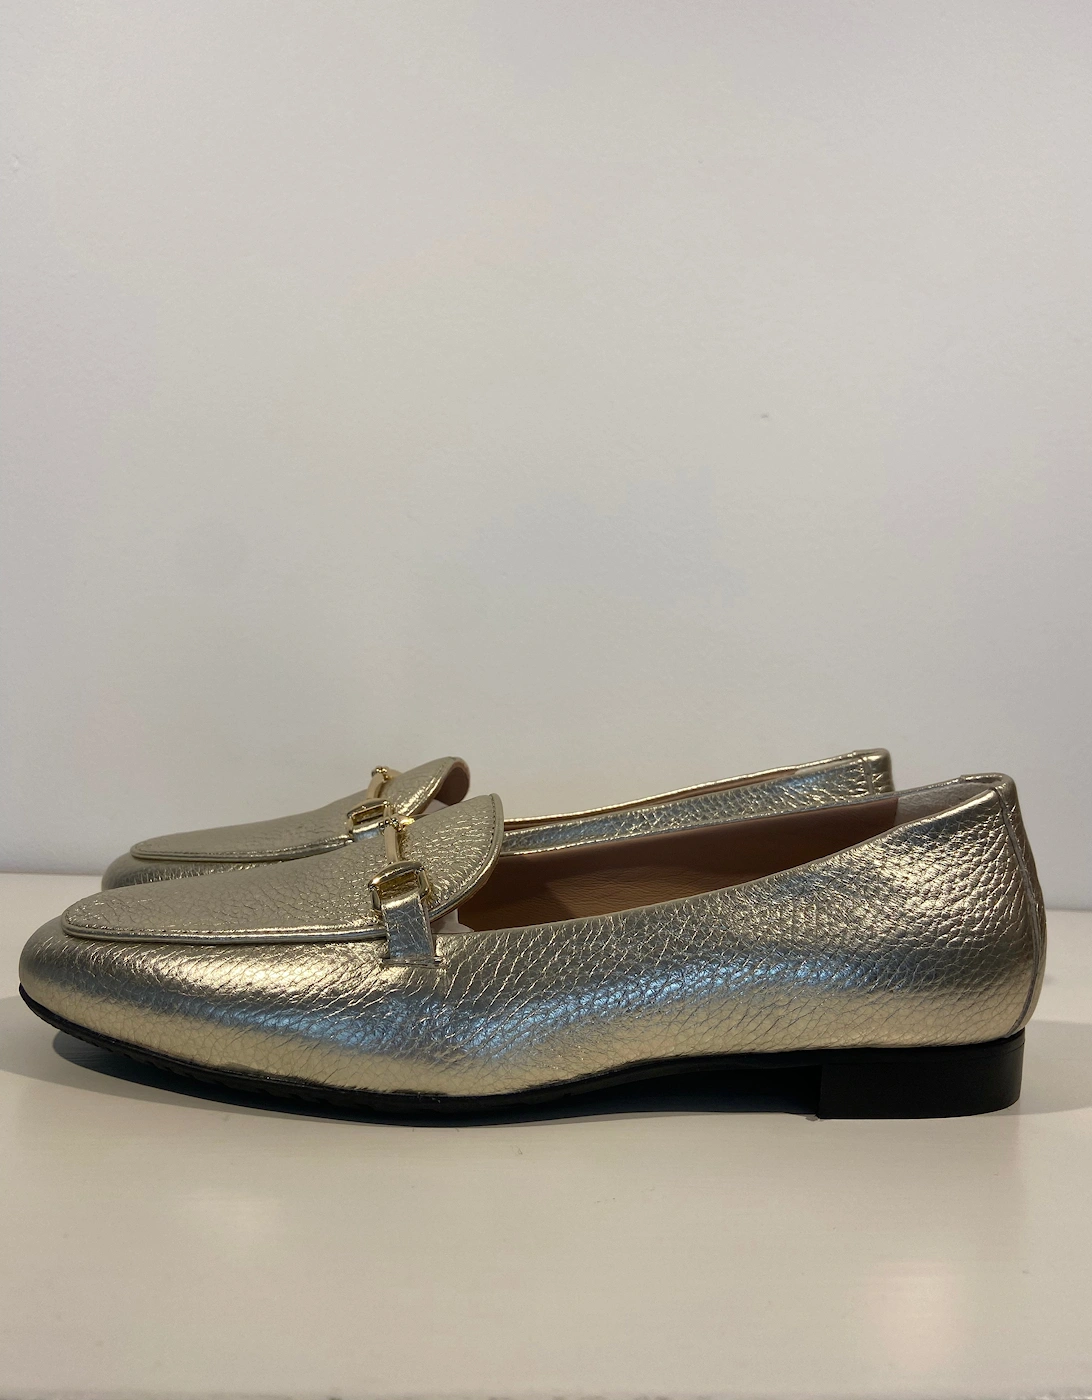 Gold Italian loafers with fine snaffle